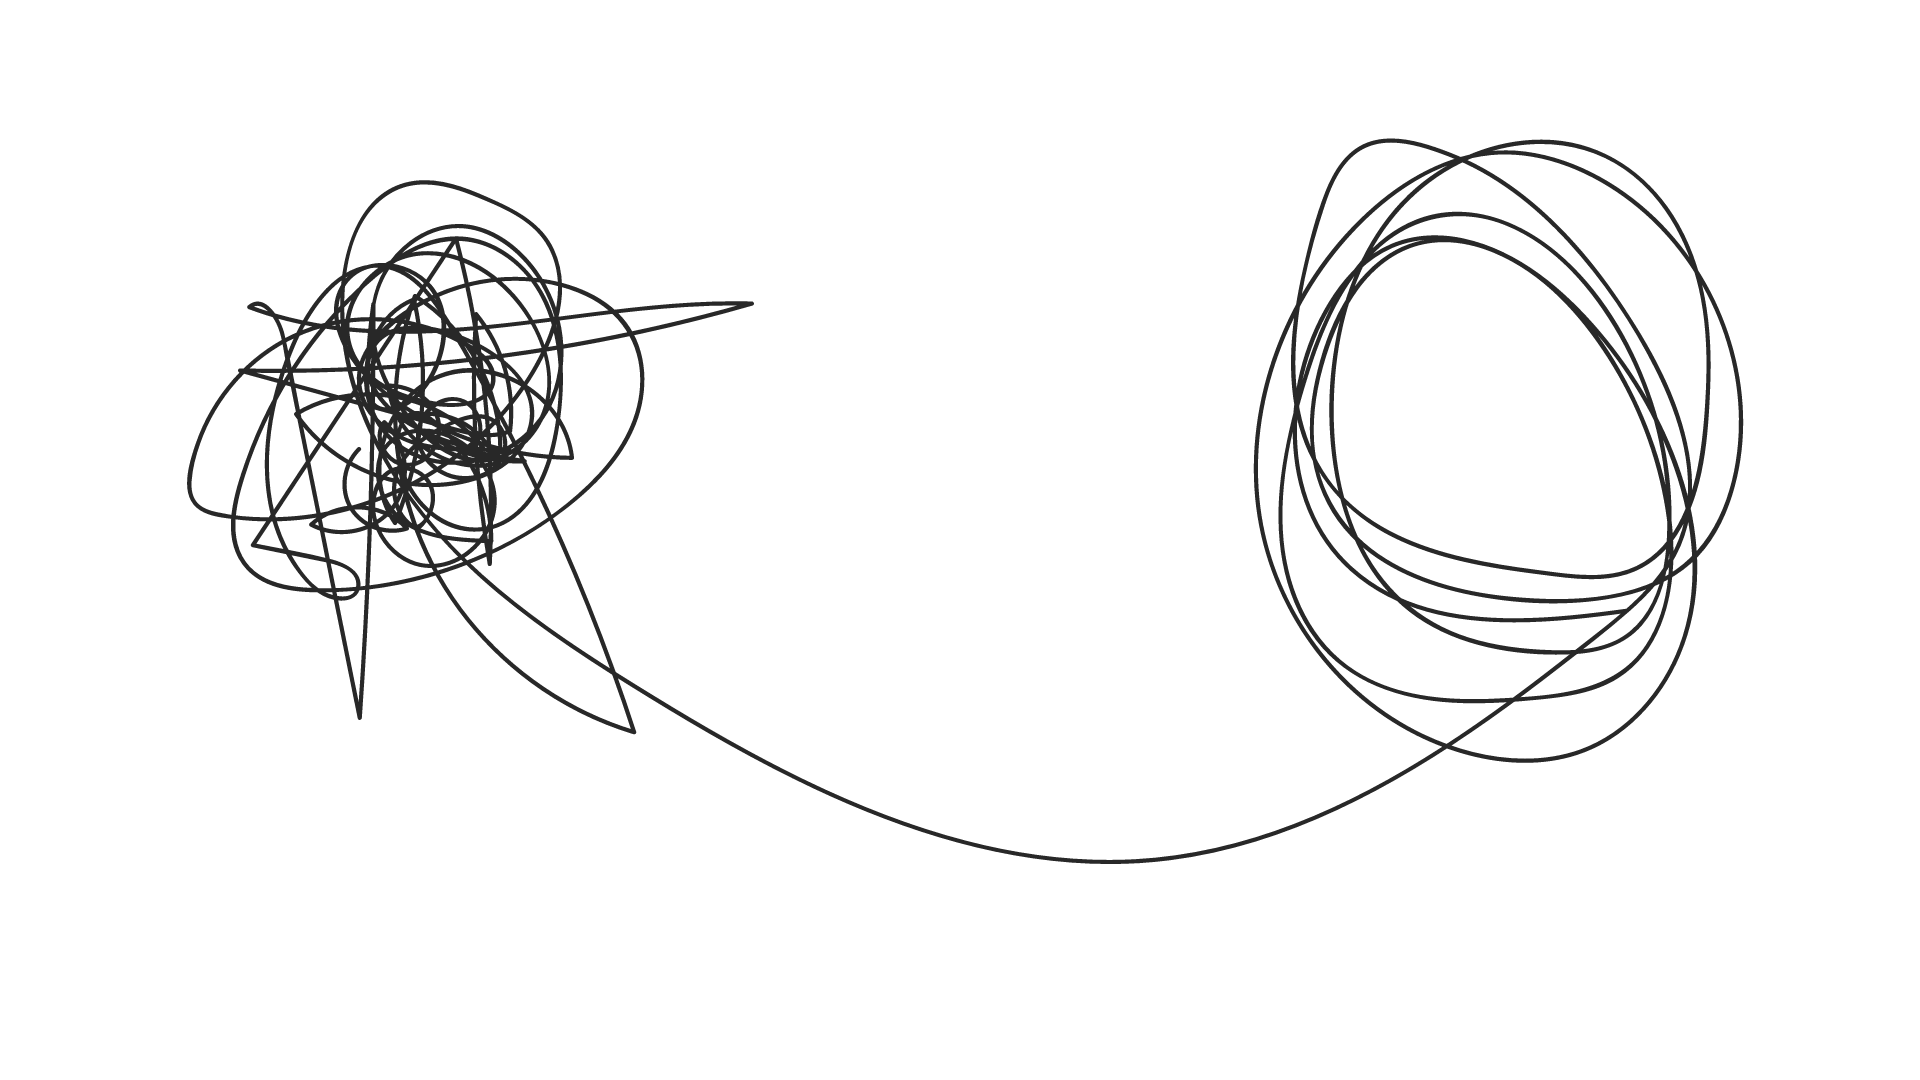 Illustration of two heads: one with string in knots and the other with string in an organized circle